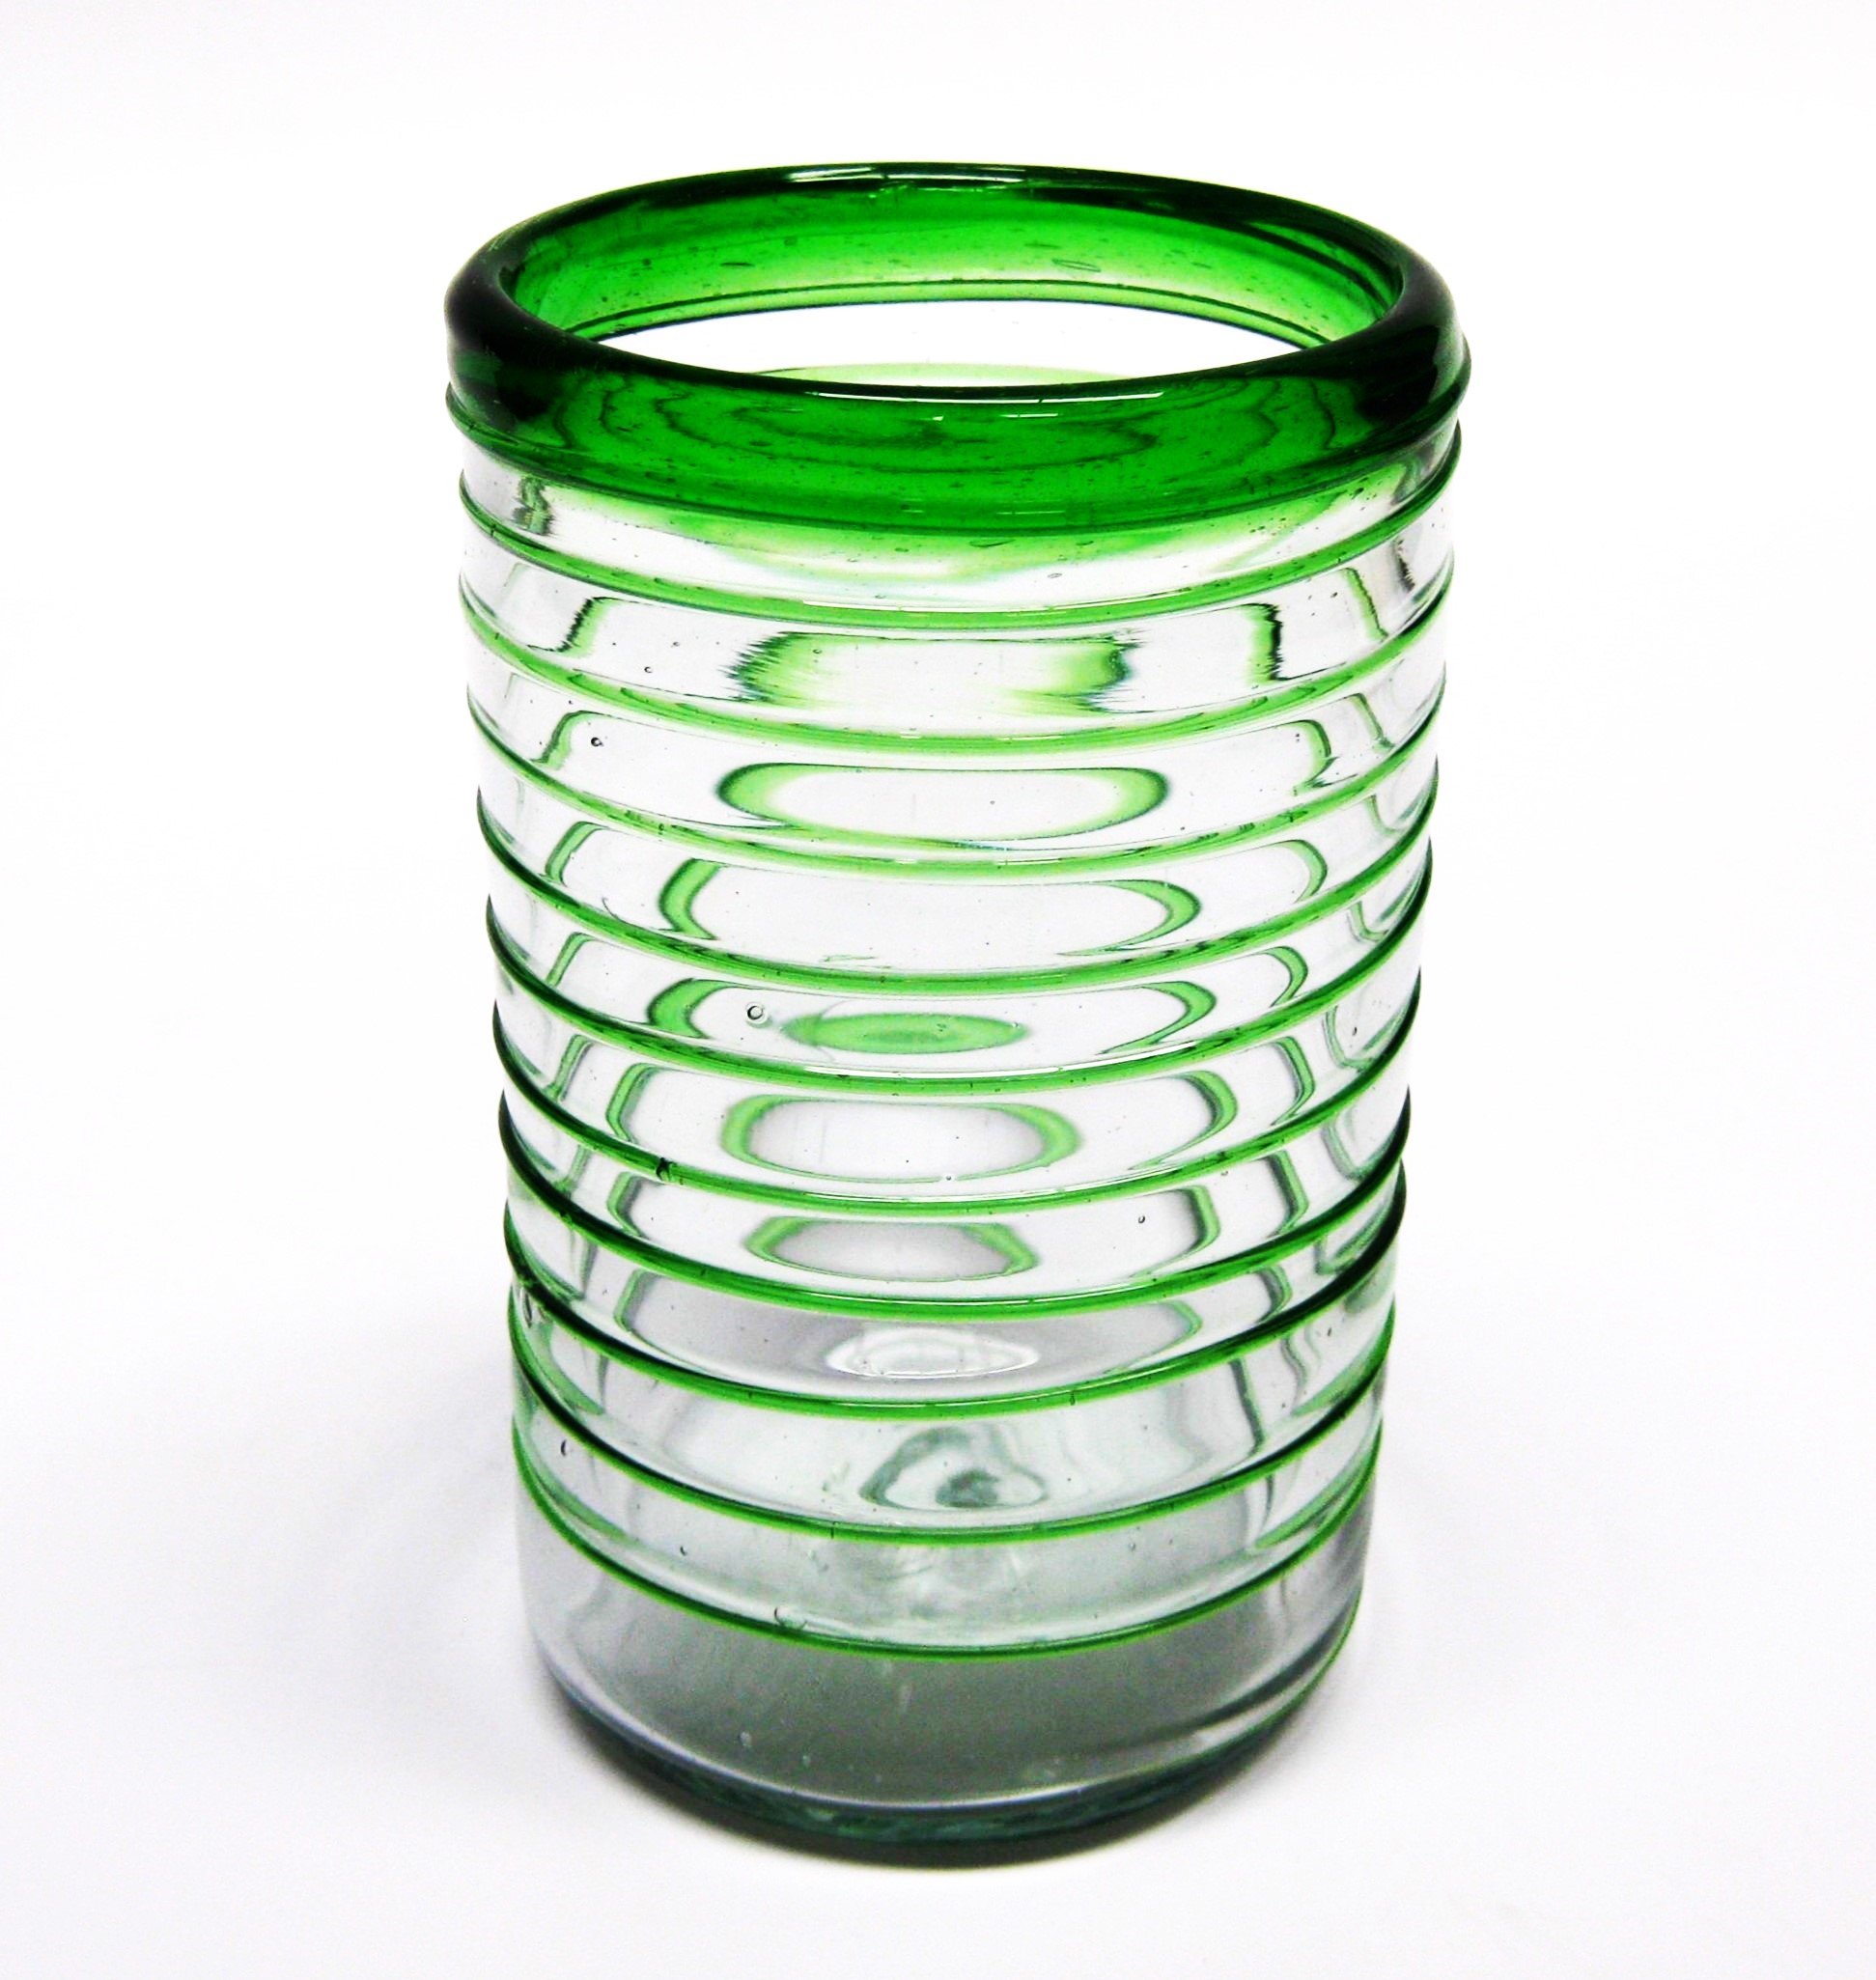 Wholesale MEXICAN GLASSWARE / Emerald Green Spiral 14 oz Drinking Glasses  / These elegant glasses covered in a emerald green spiral will add a handcrafted touch to your kitchen decor.